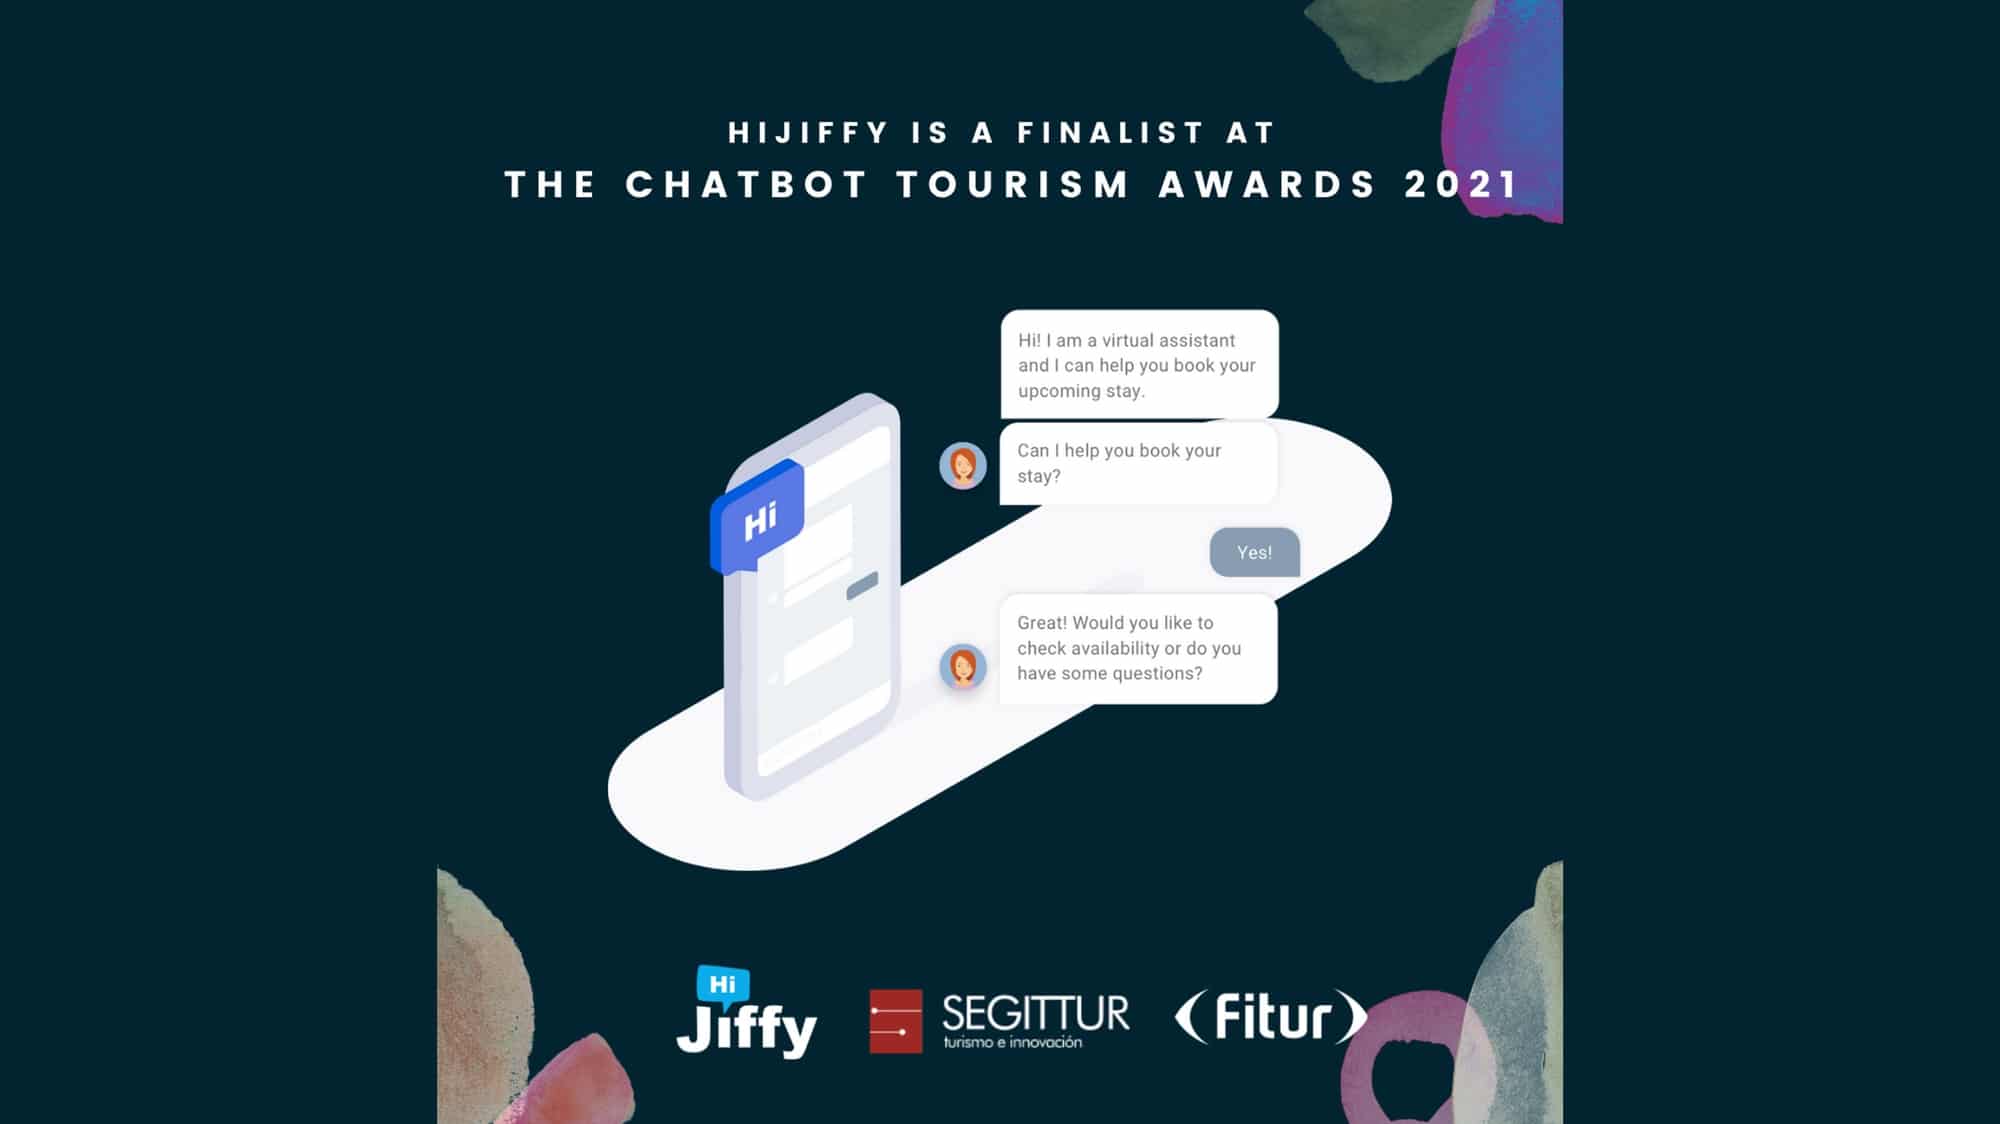 Hijiffy is nominated as a finalist at the chatbot tourism awards 2021